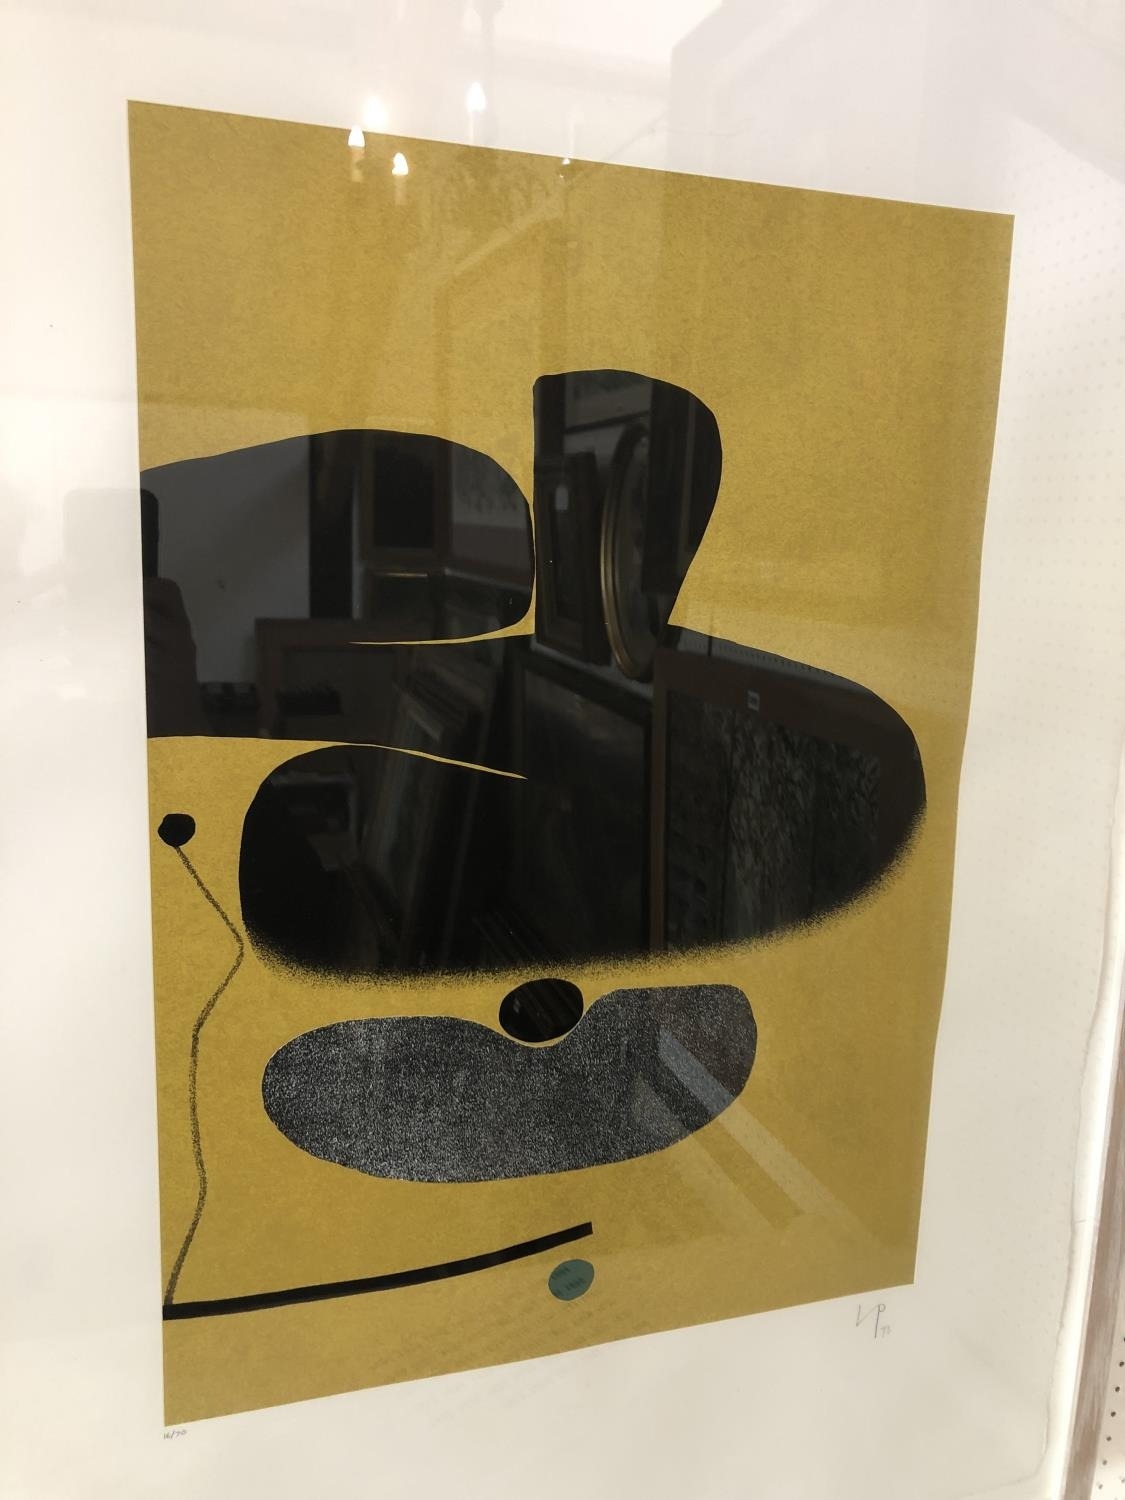 Victor Pasmore (British, 1908-1998) - 'Points of Contact No. 18' (1973), limited edition screenprint - Image 2 of 6